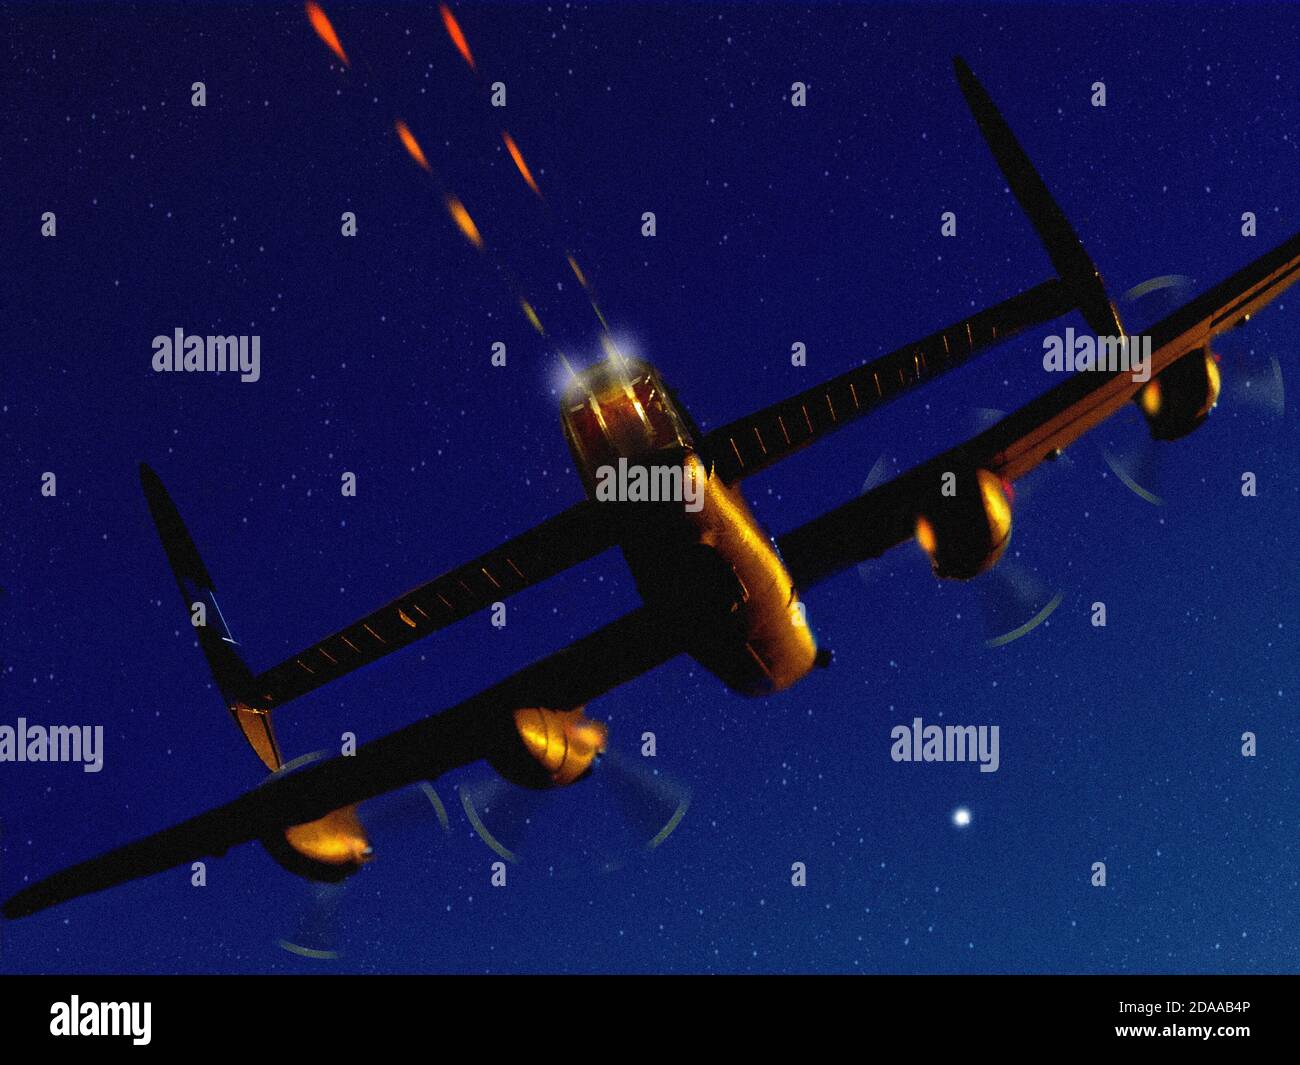 'Tail end Charlie' A rear end, night time scene of a World War Two Avro Lancaster aircraft firing its rear guns, using a plastic model and Photoshop. Stock Photo